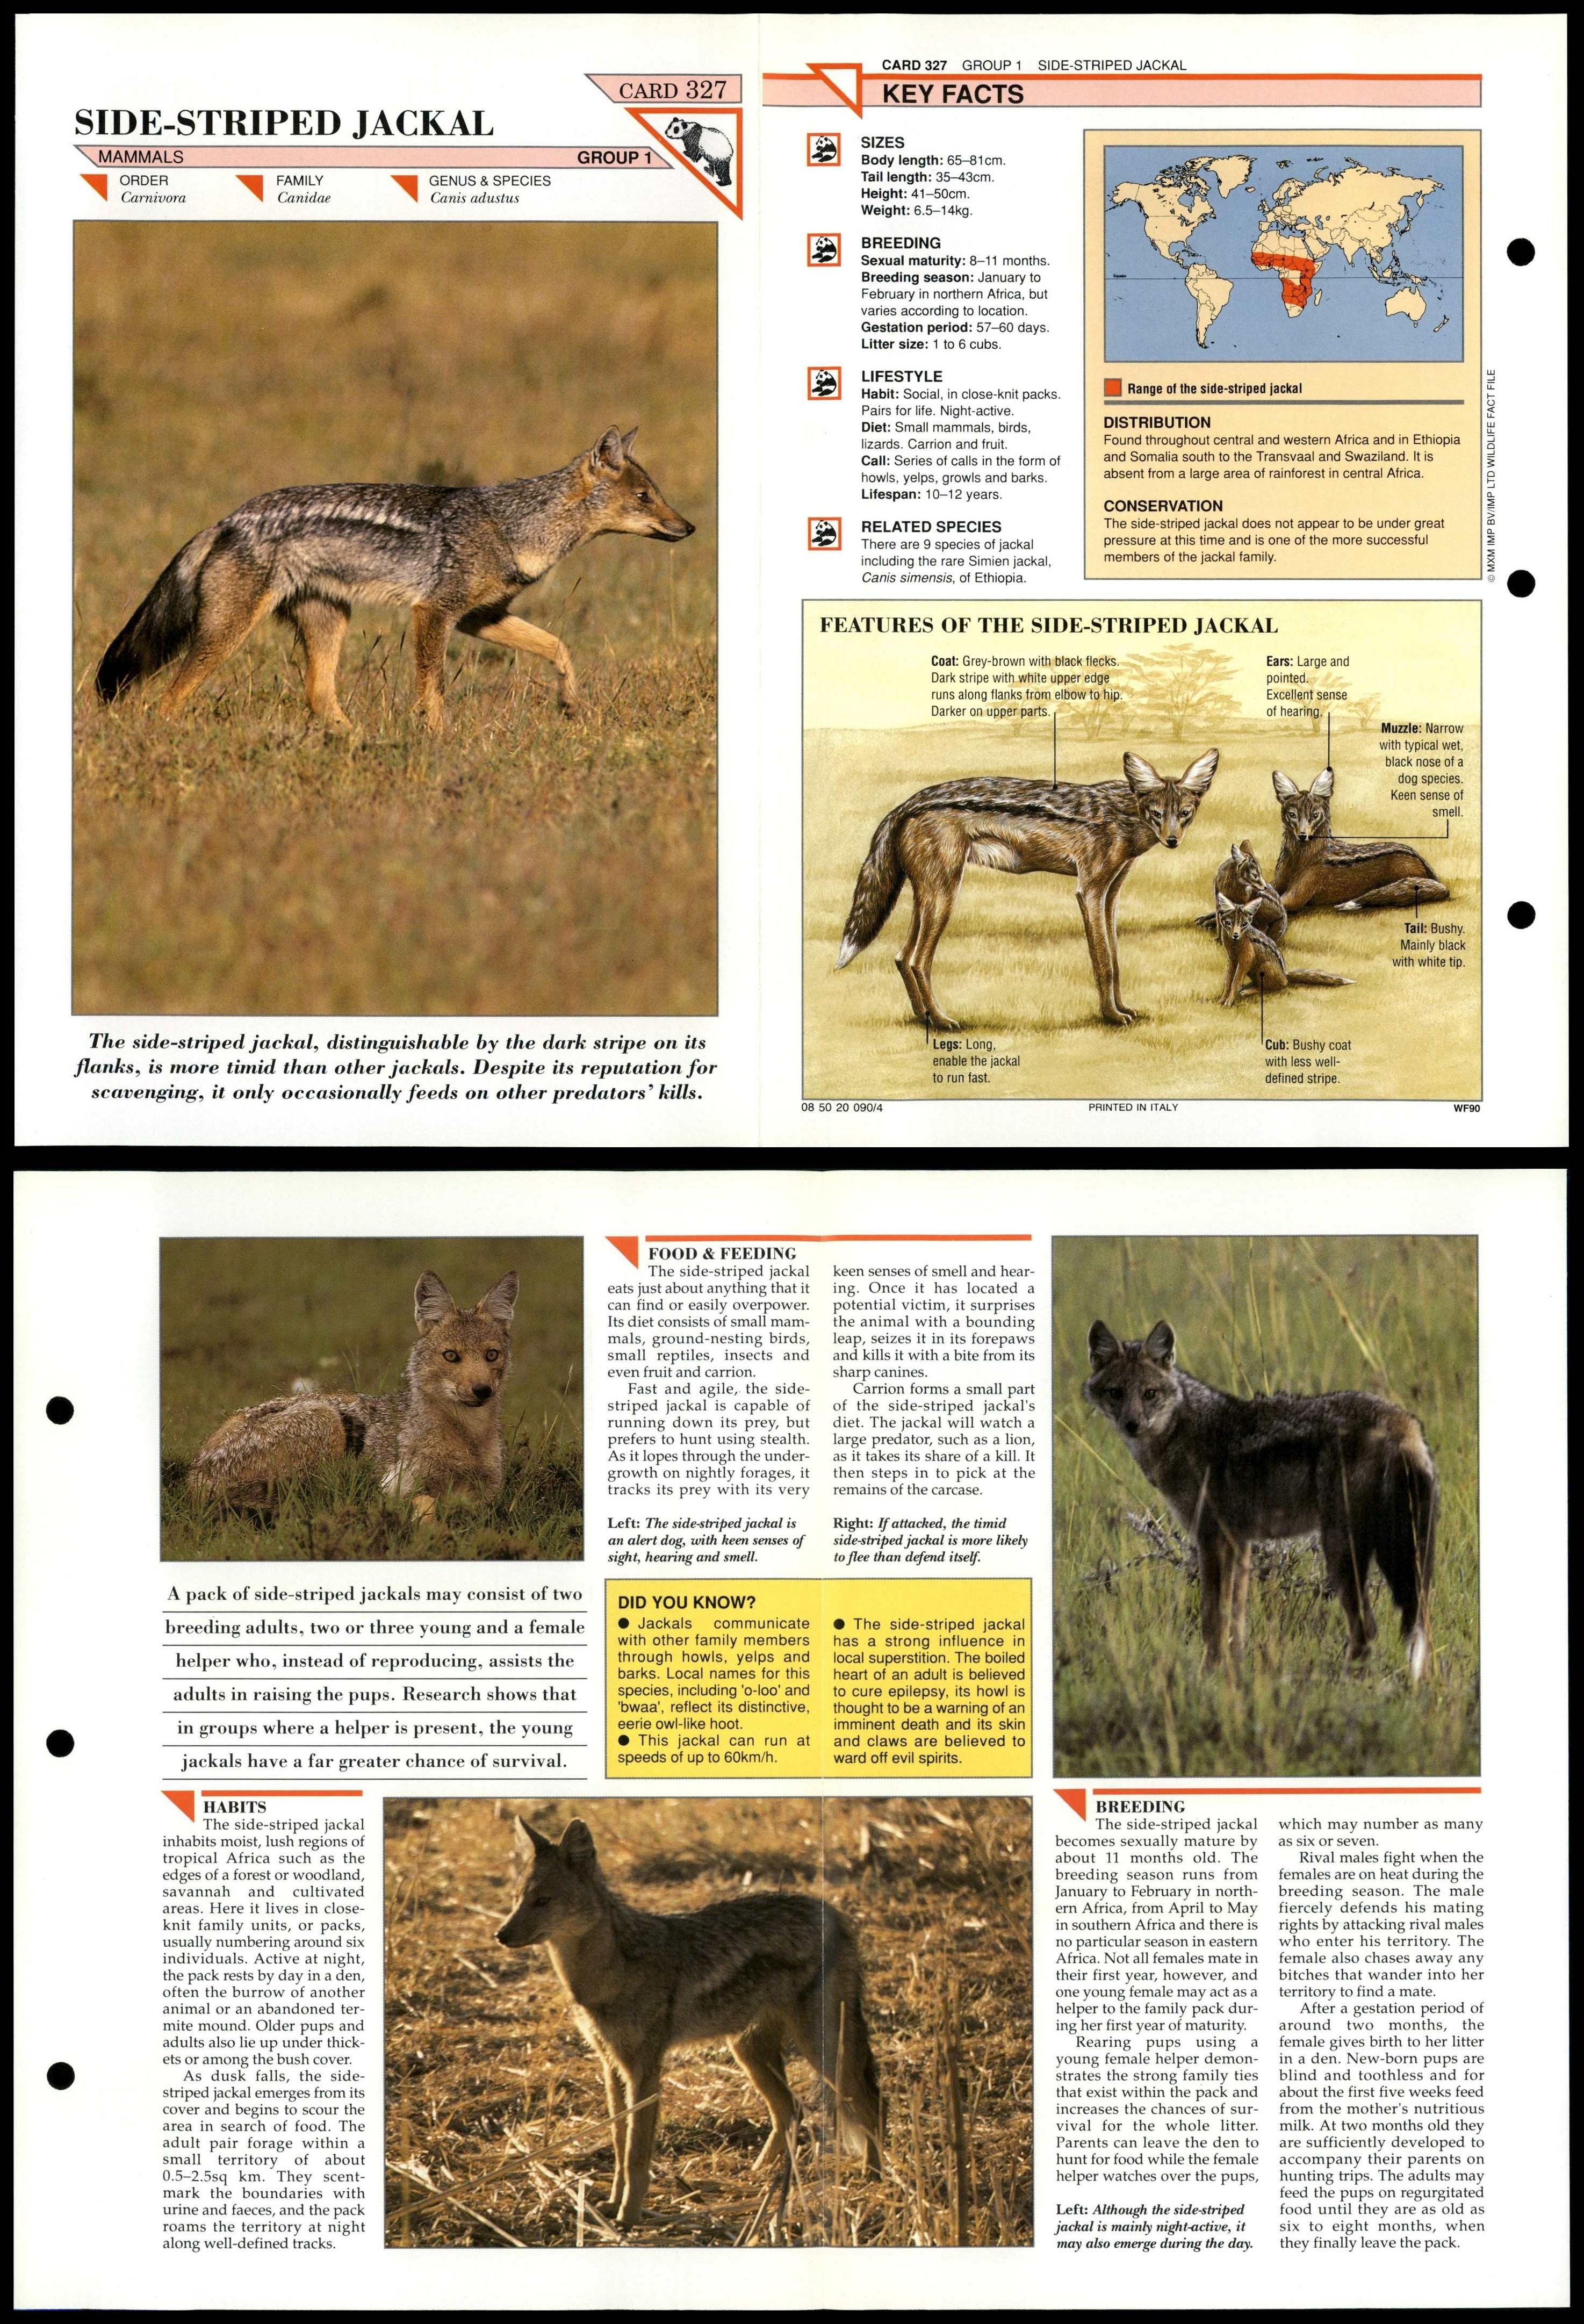 Side-Striped Jackal #327 Mammals Wildlife Fact File Fold-Out Card